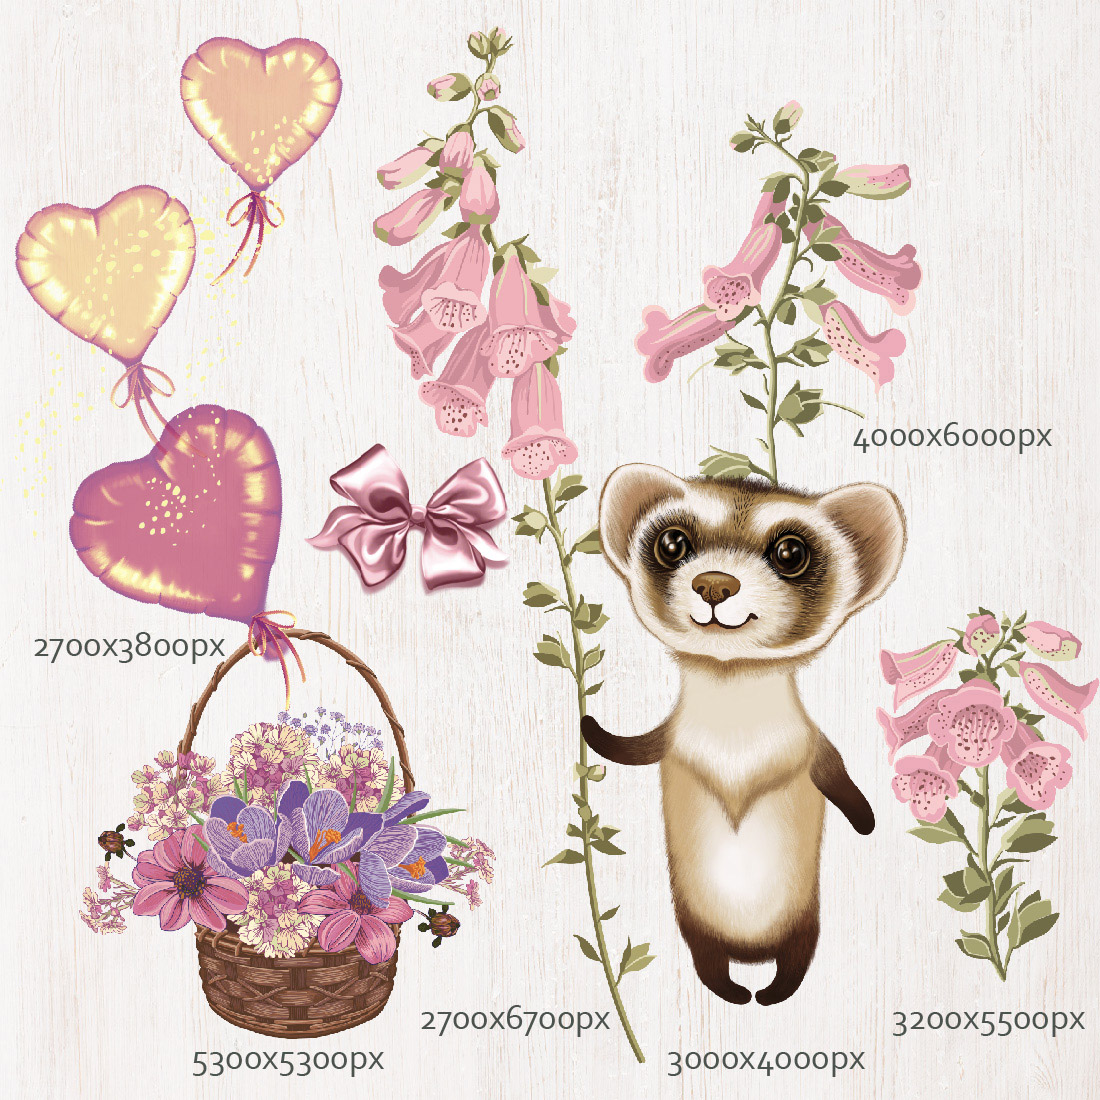 Cute Cartoon Ferret with Flowers examples.